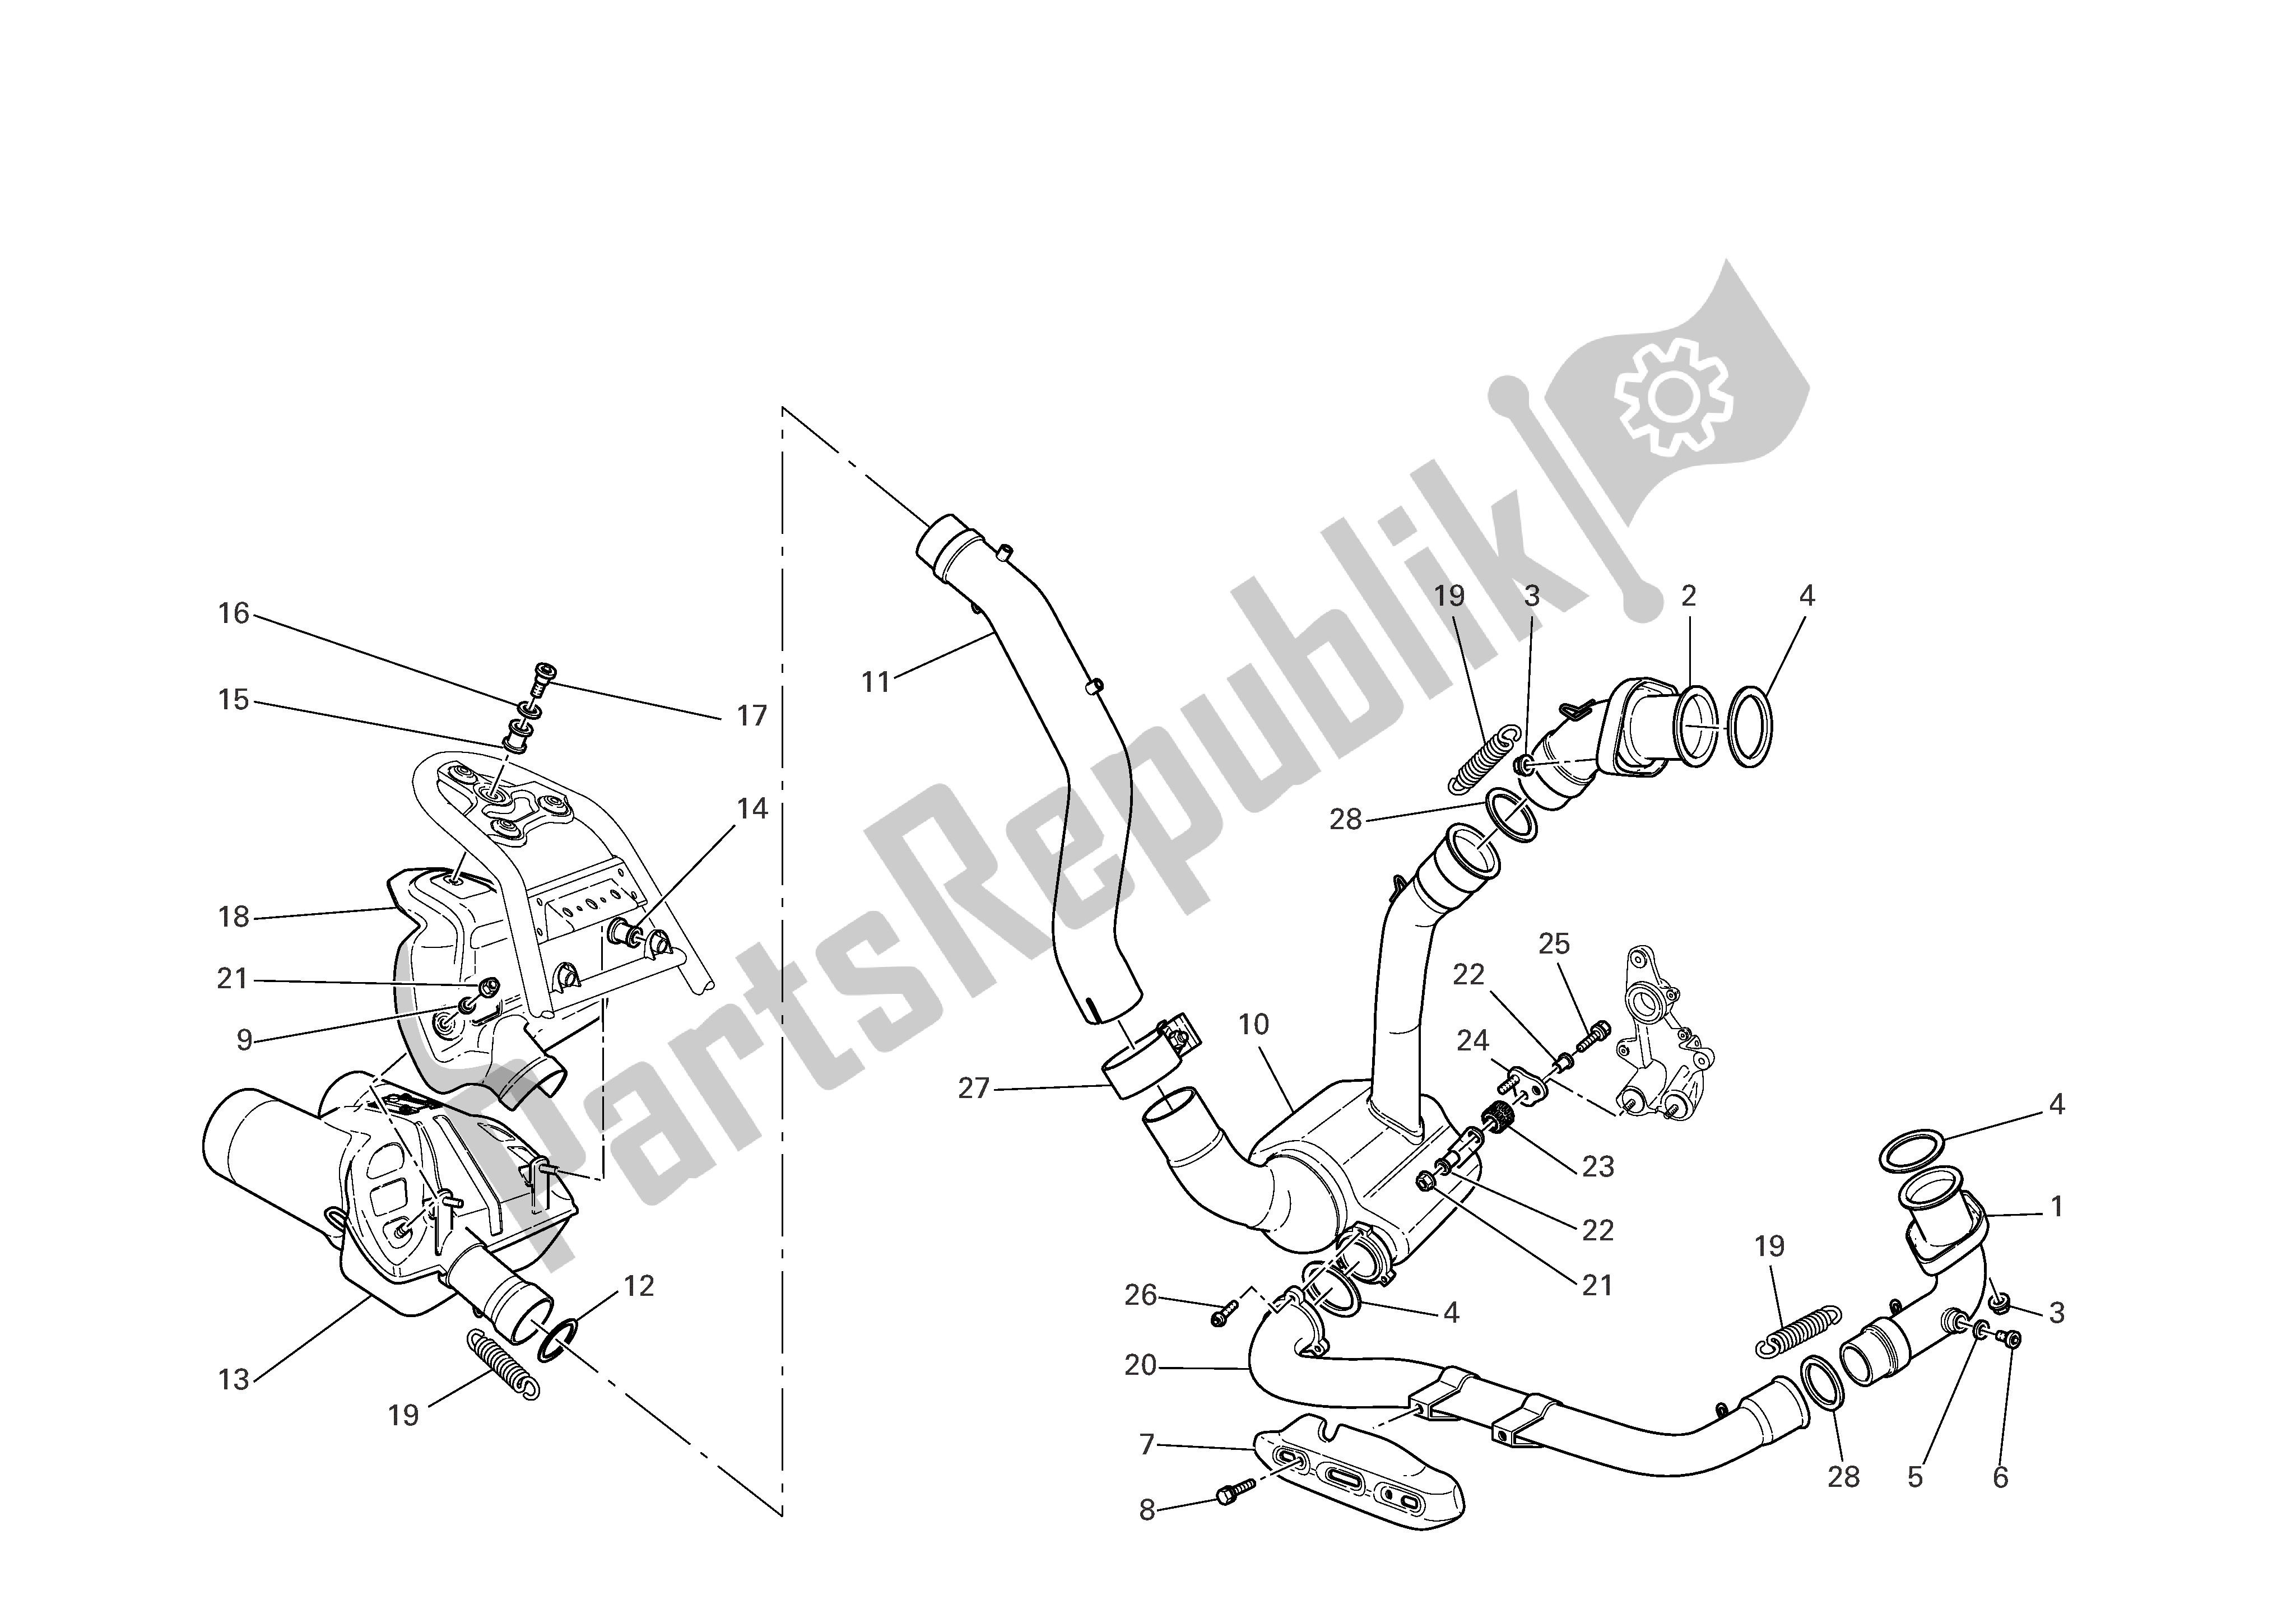 All parts for the Exhaust System of the Ducati Multistrada 1000 2006